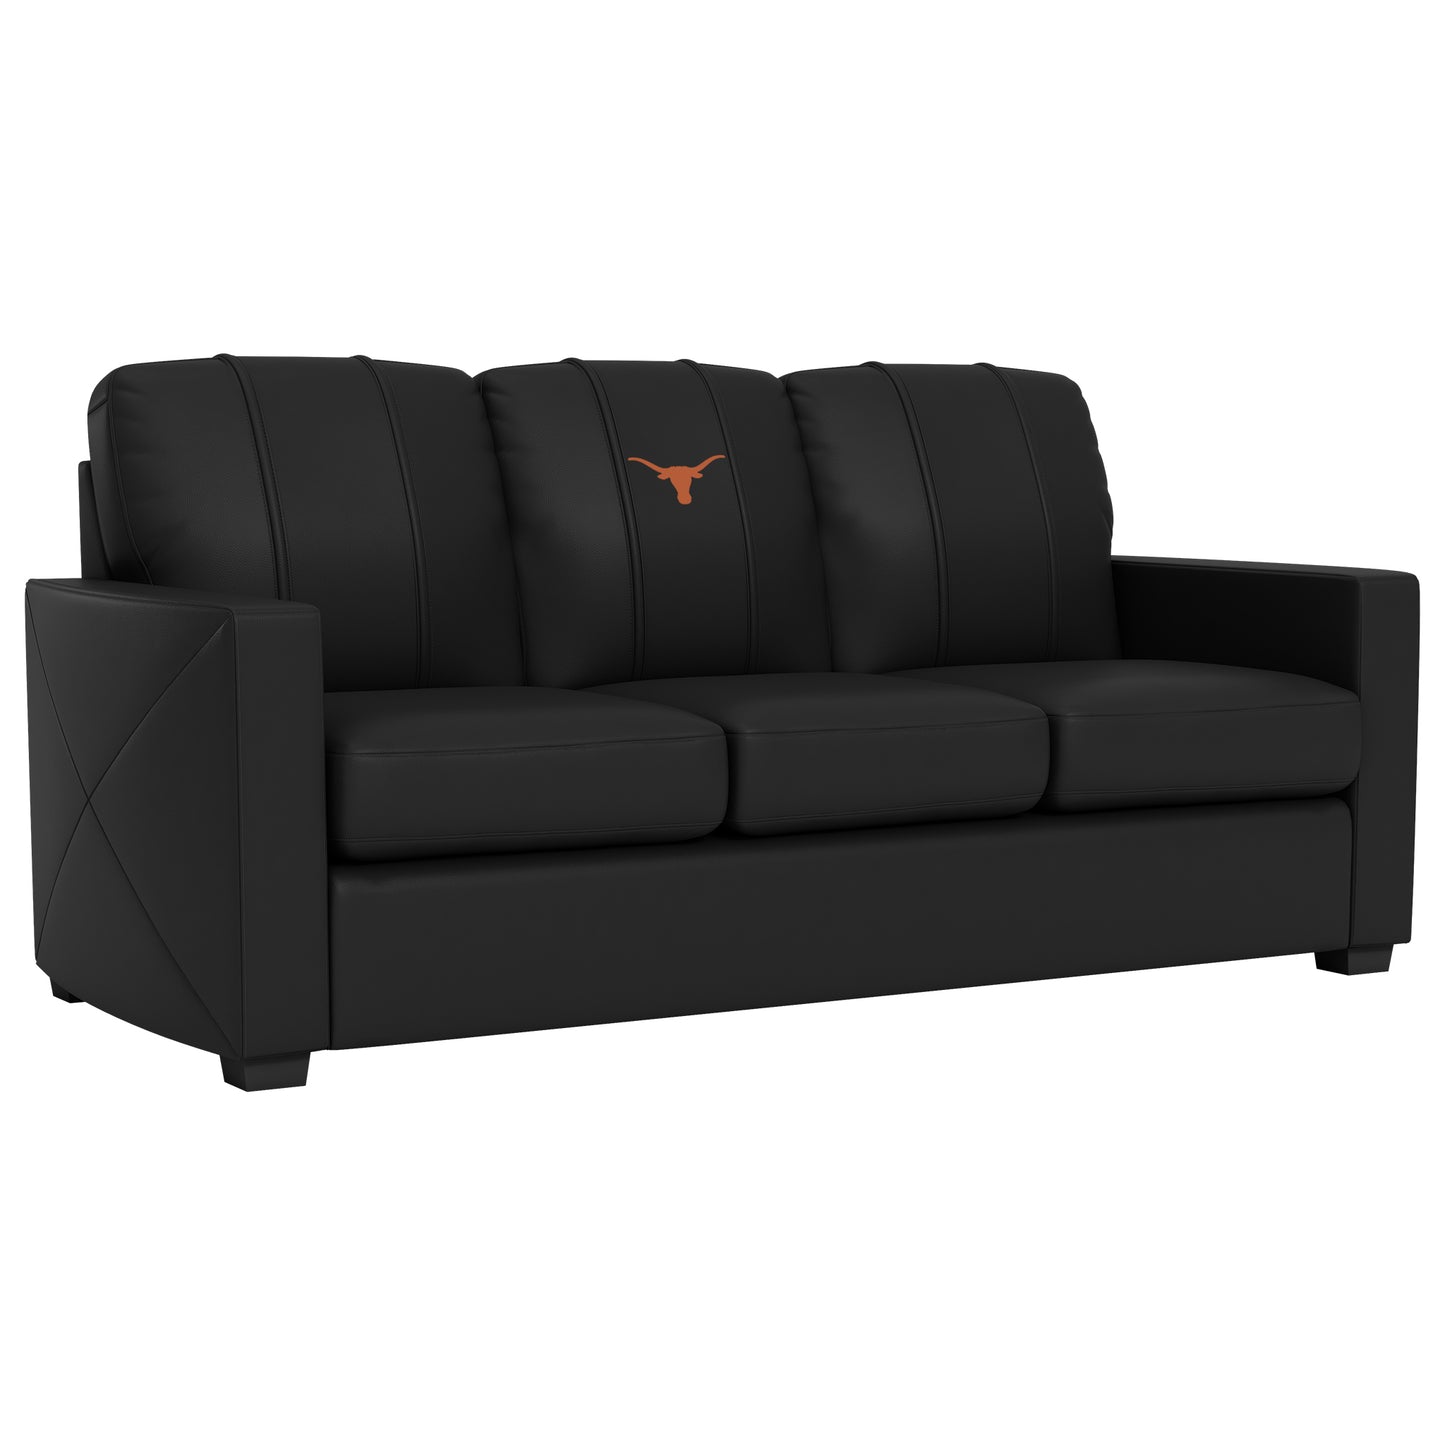 Silver Sofa with Texas Longhorns Primary